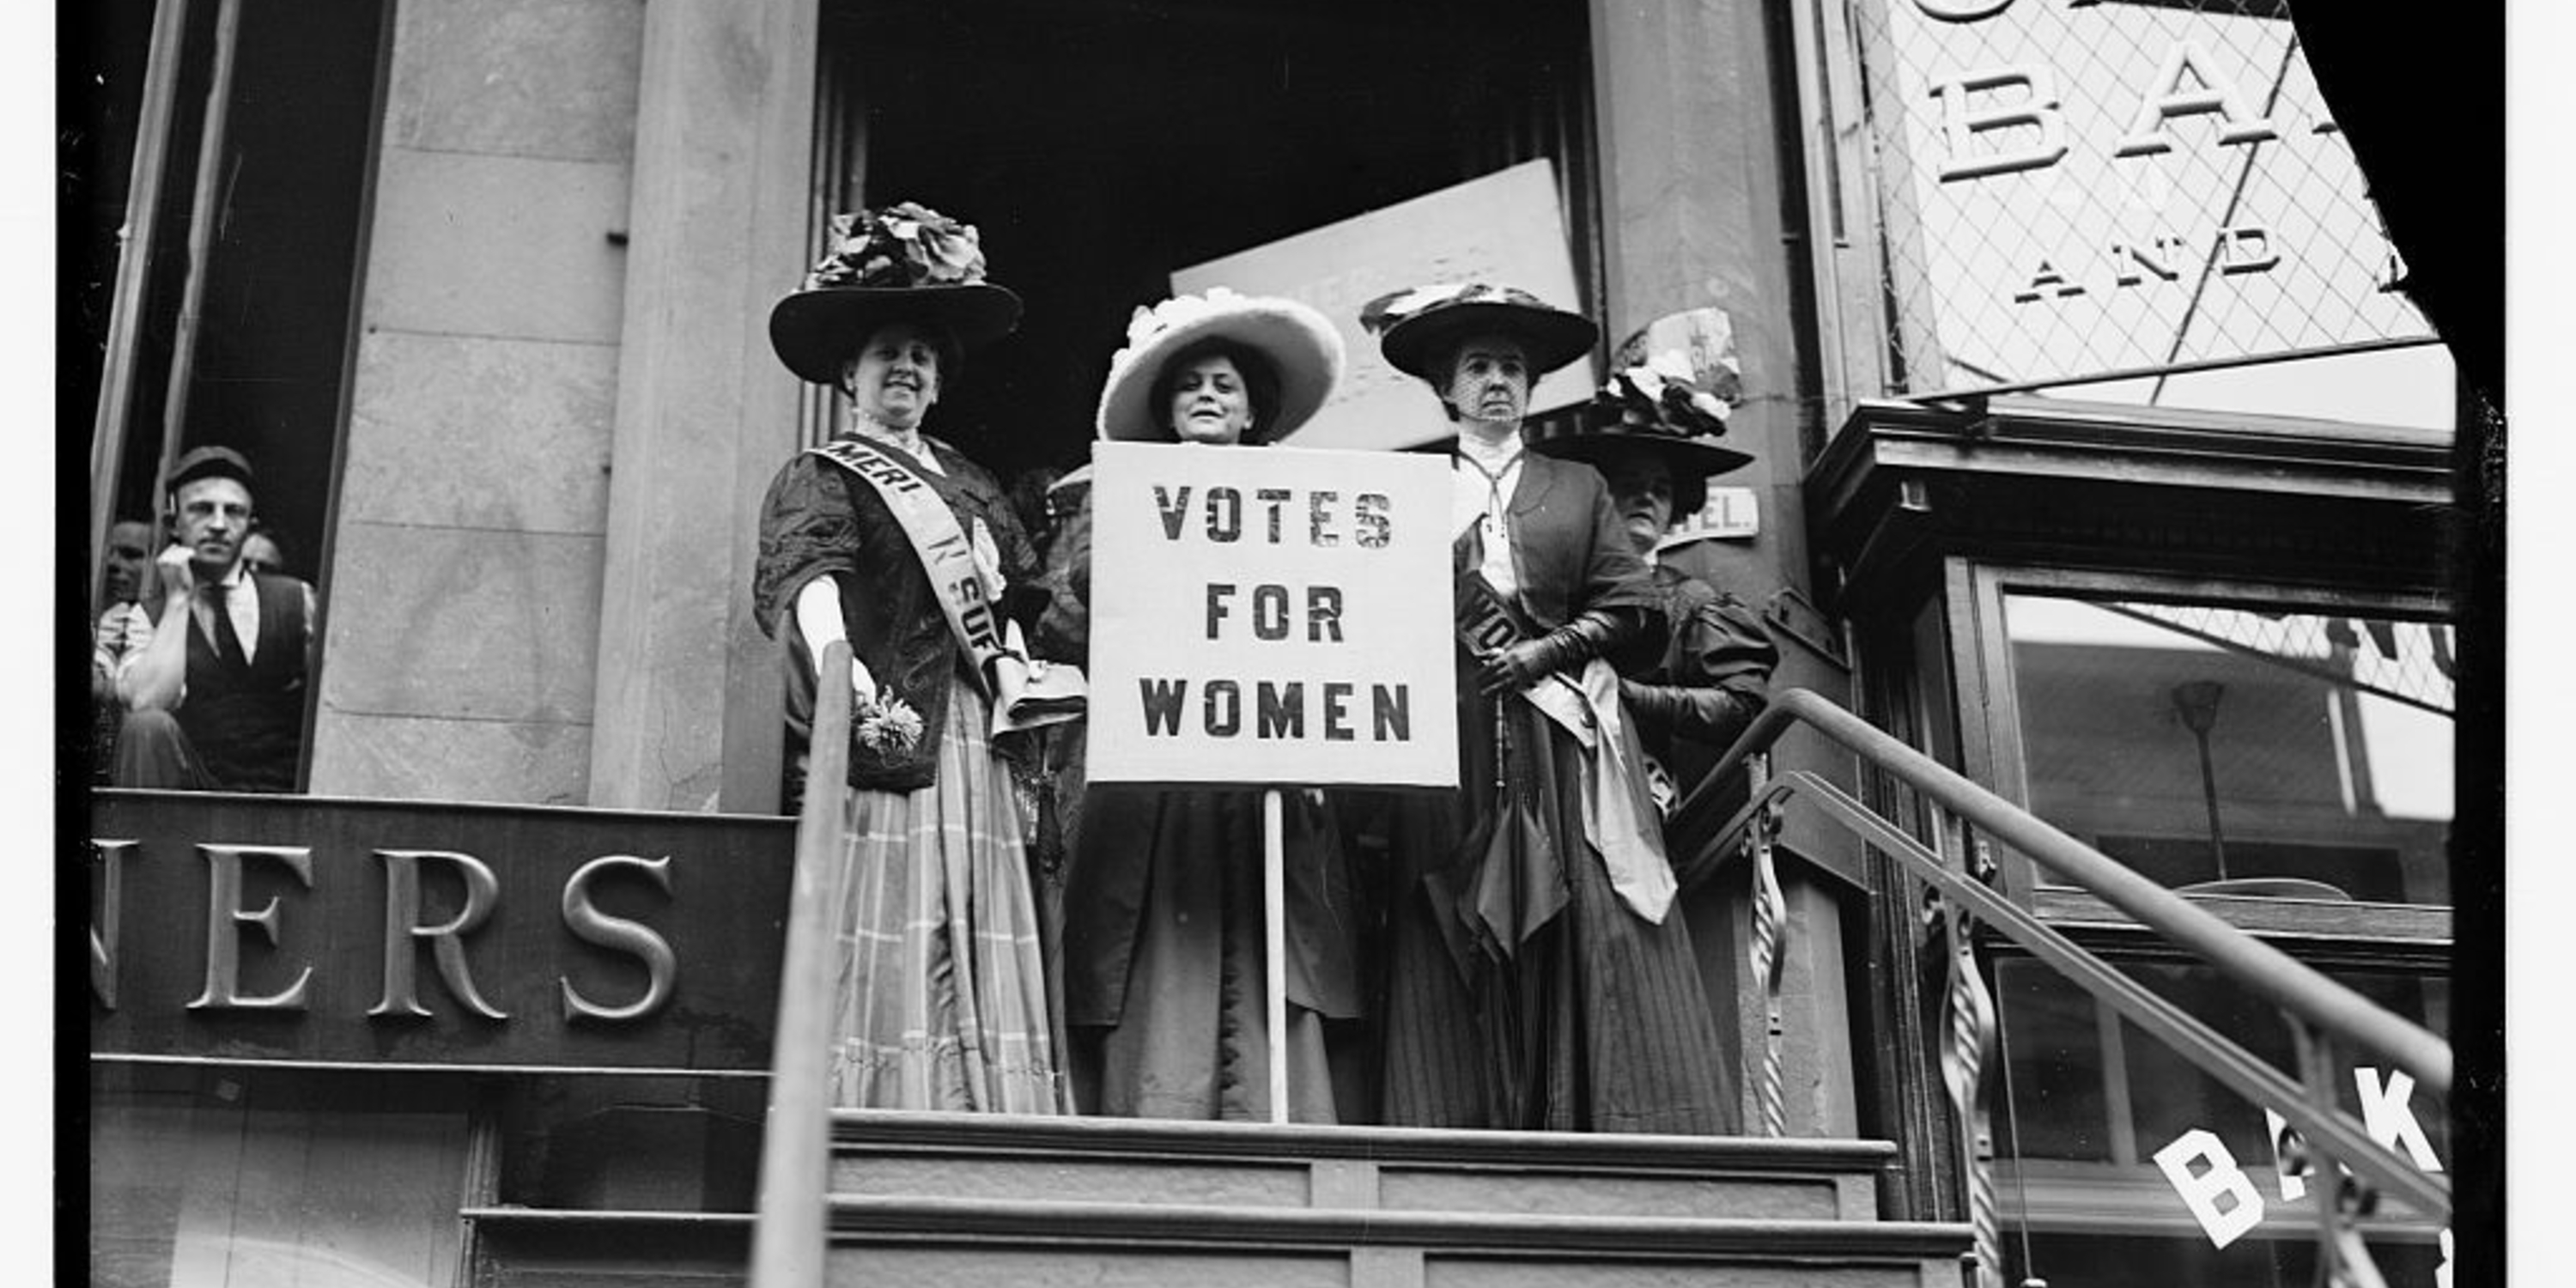 Suffragists with signs: "Votes for Women"